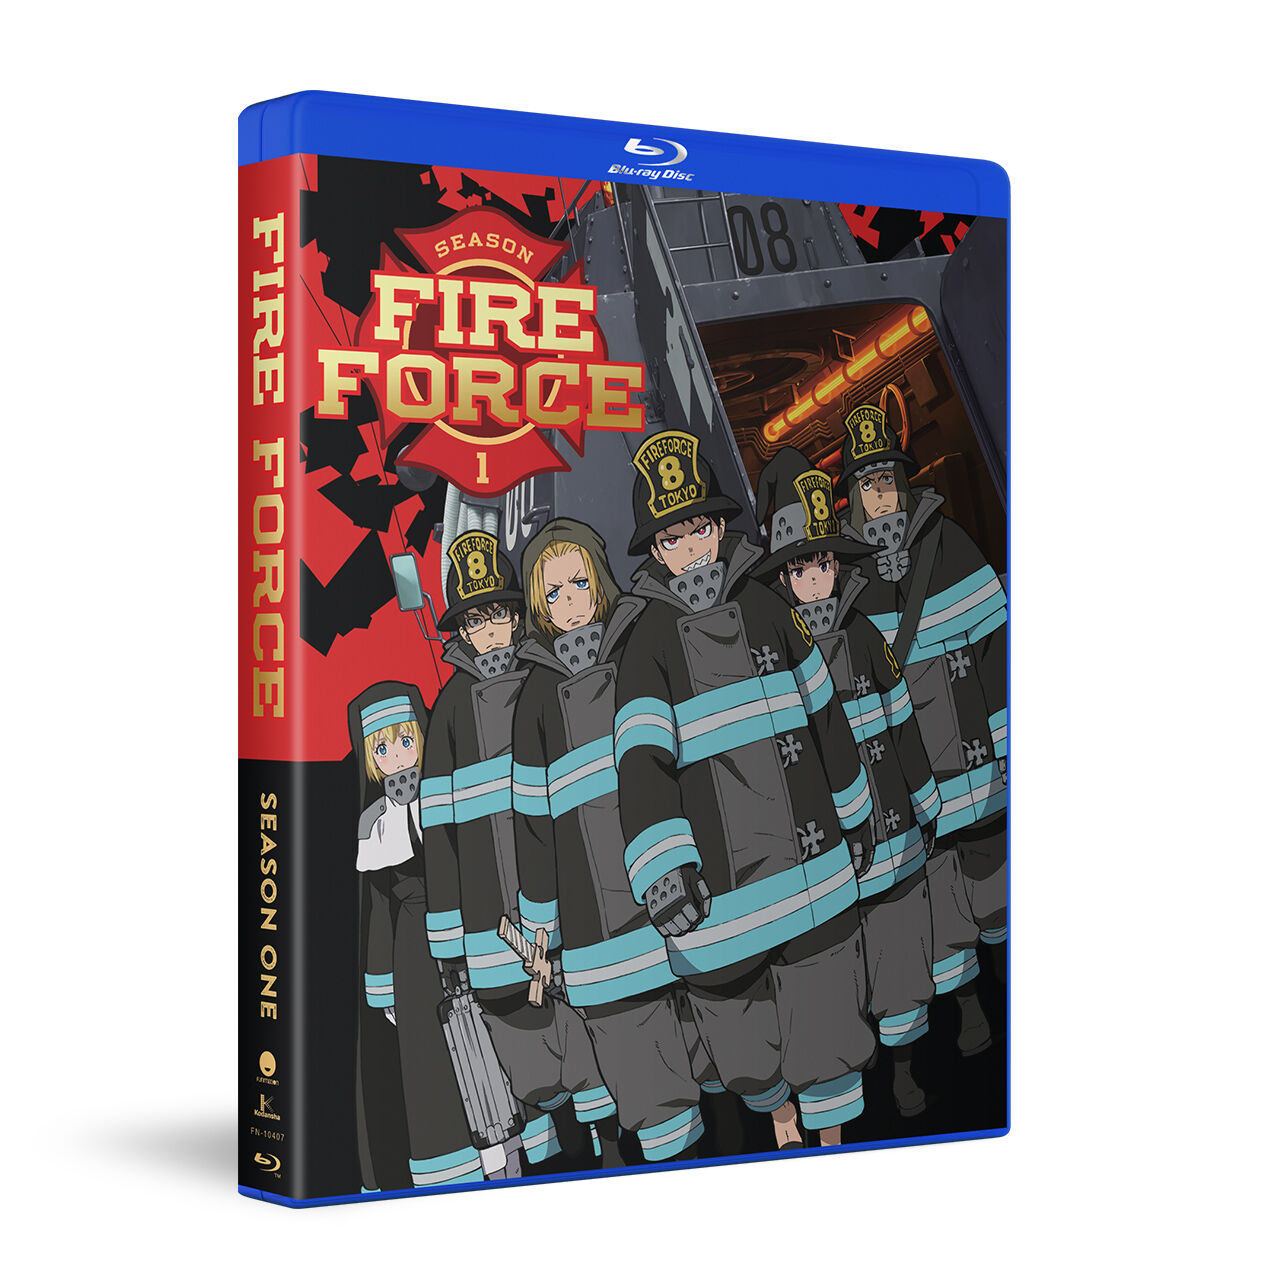 Fire Force Season 2 Parts 1 & 2 (Limited Edition Blu-ray & DVD) Unboxing –  The Normanic Vault